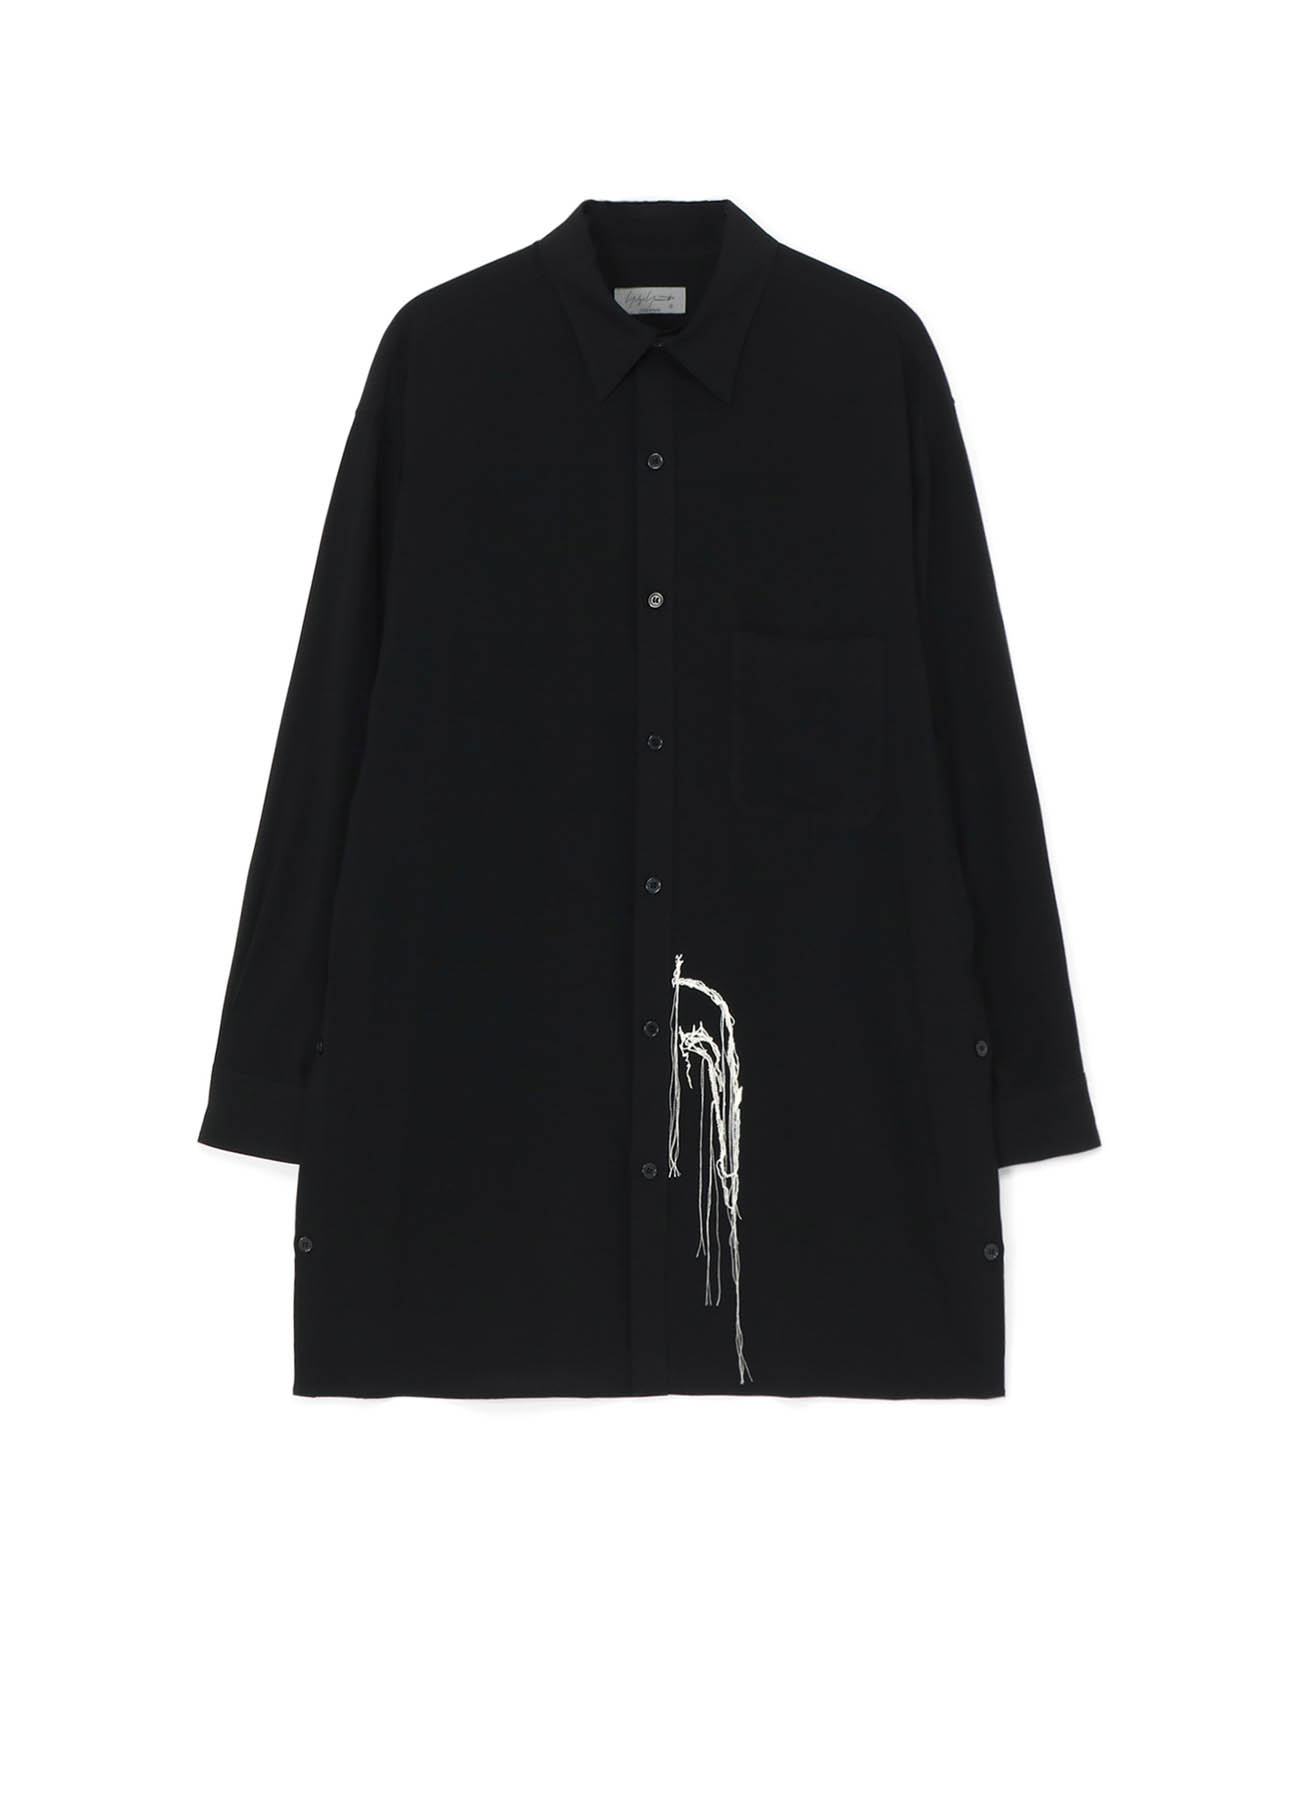 RAYON CAMBRIC SHIRT WITH SIDE SLITS